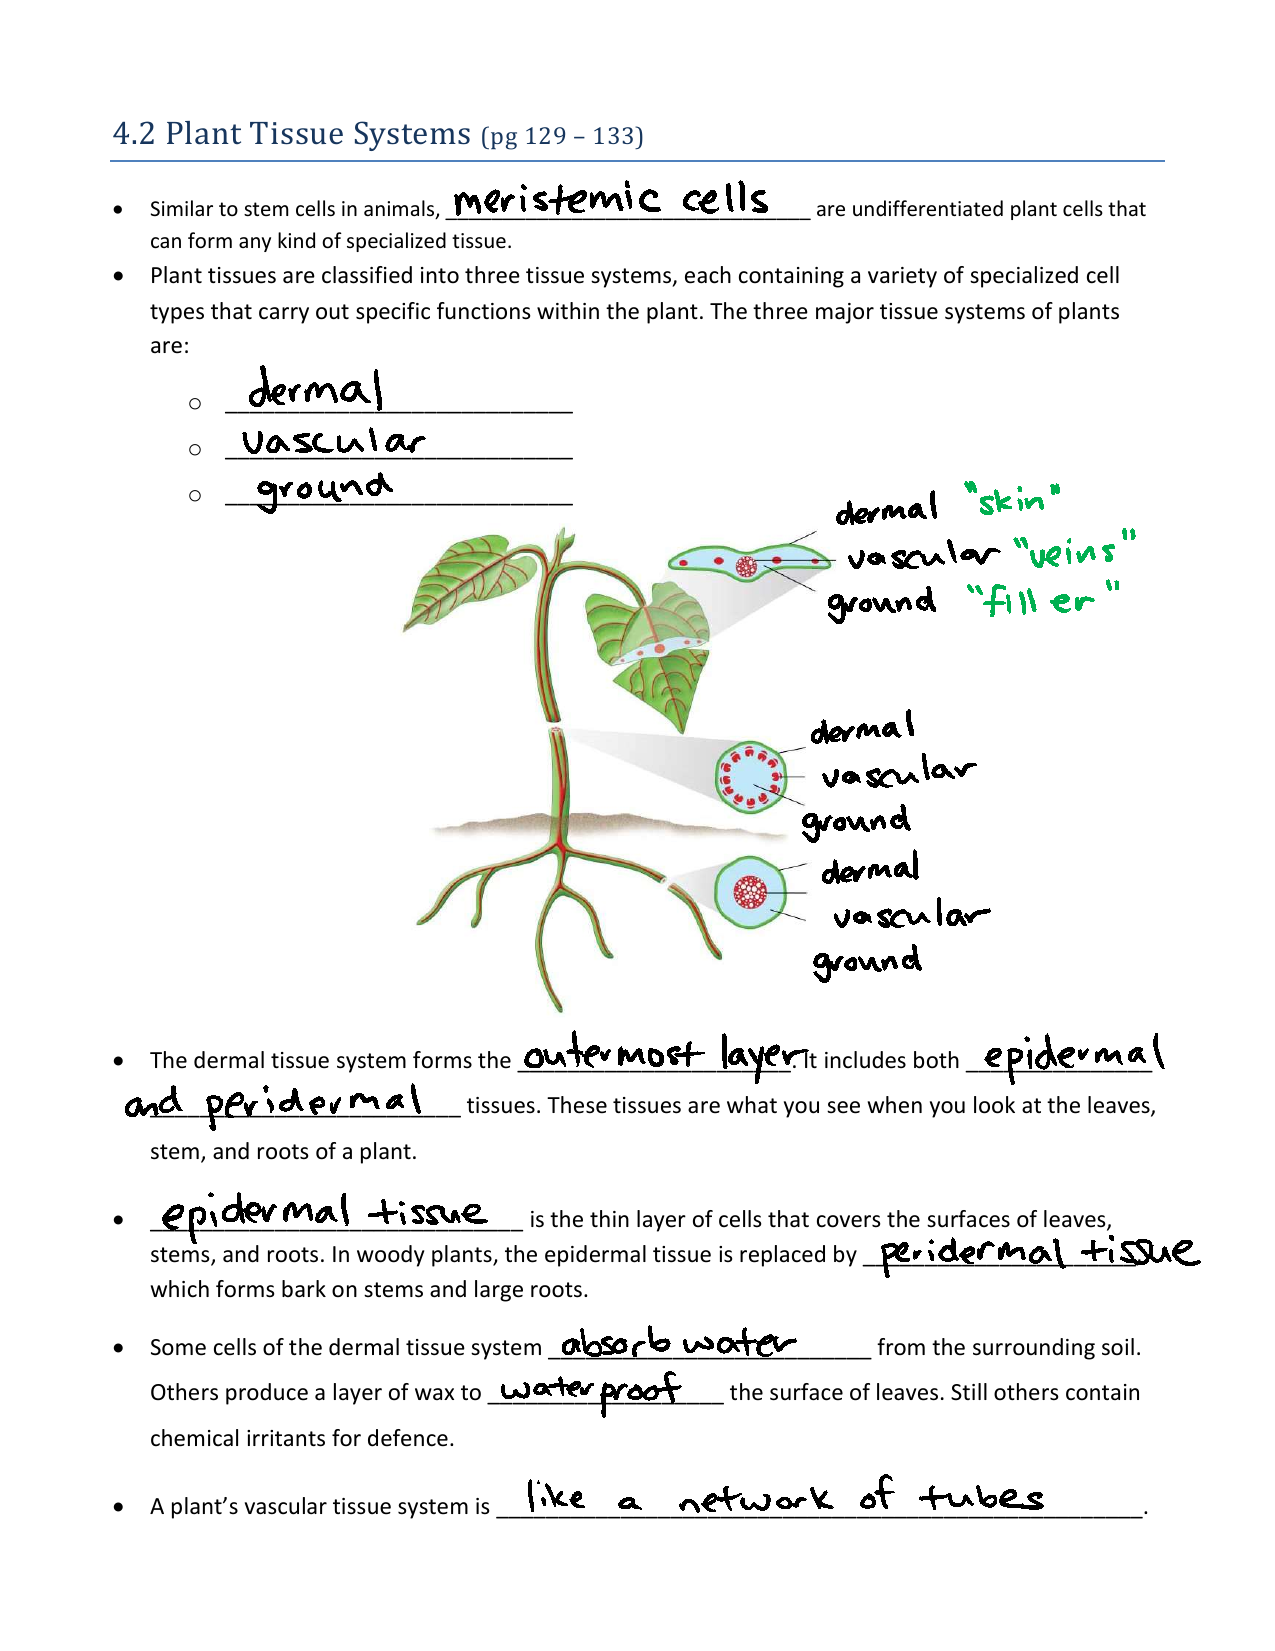  - Plant Tissues Systems handout